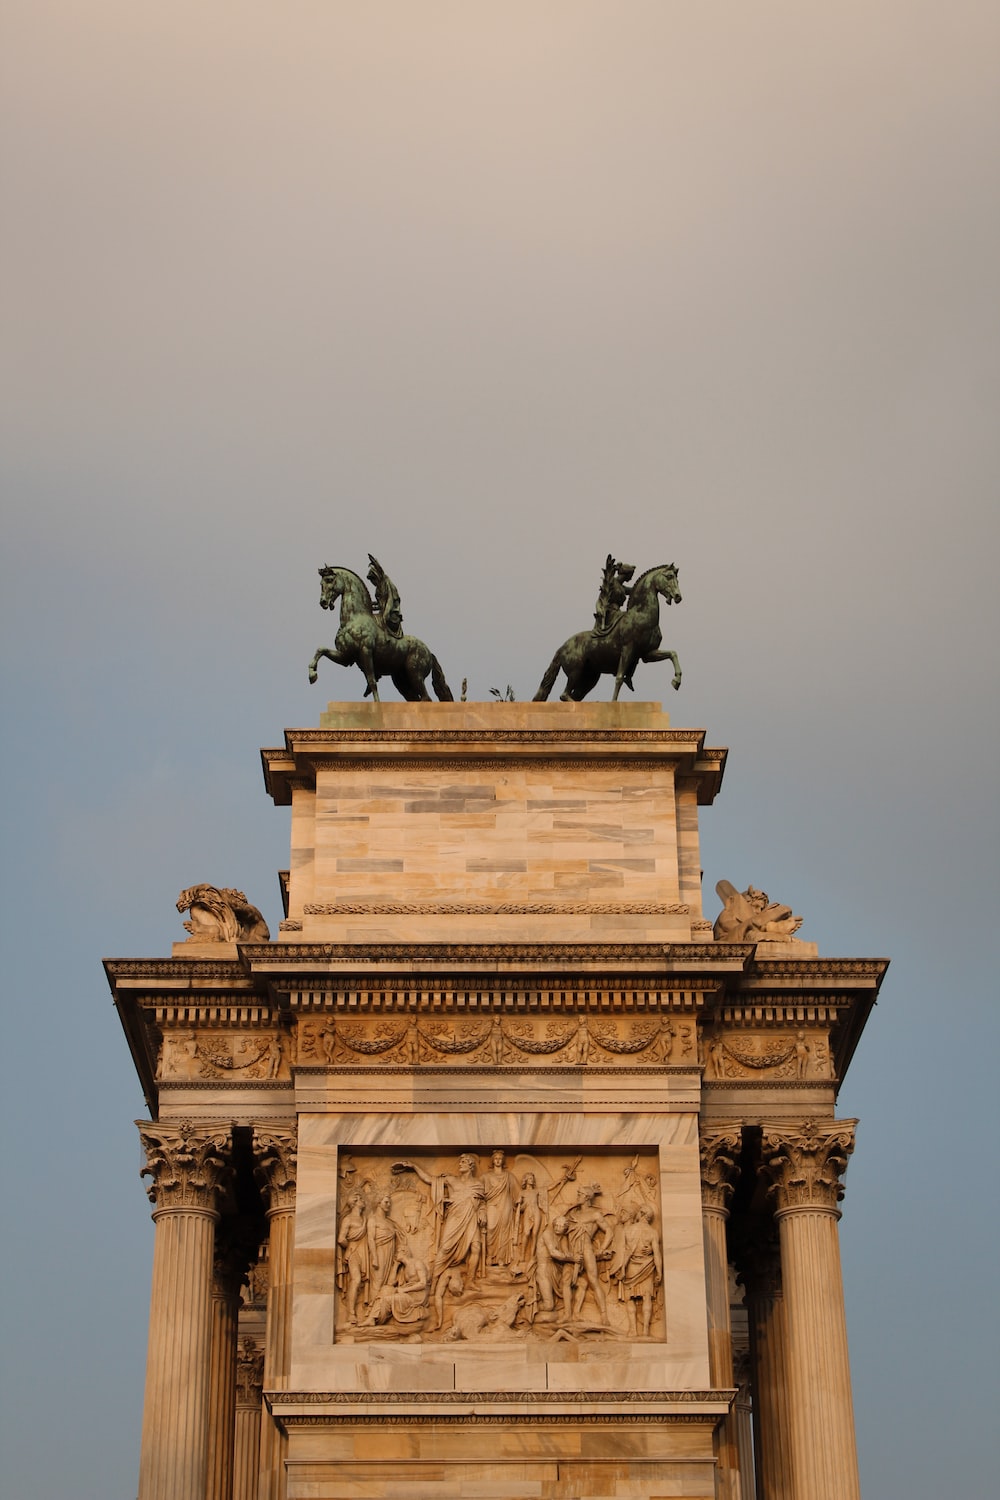 a statue of two horses on top of a building